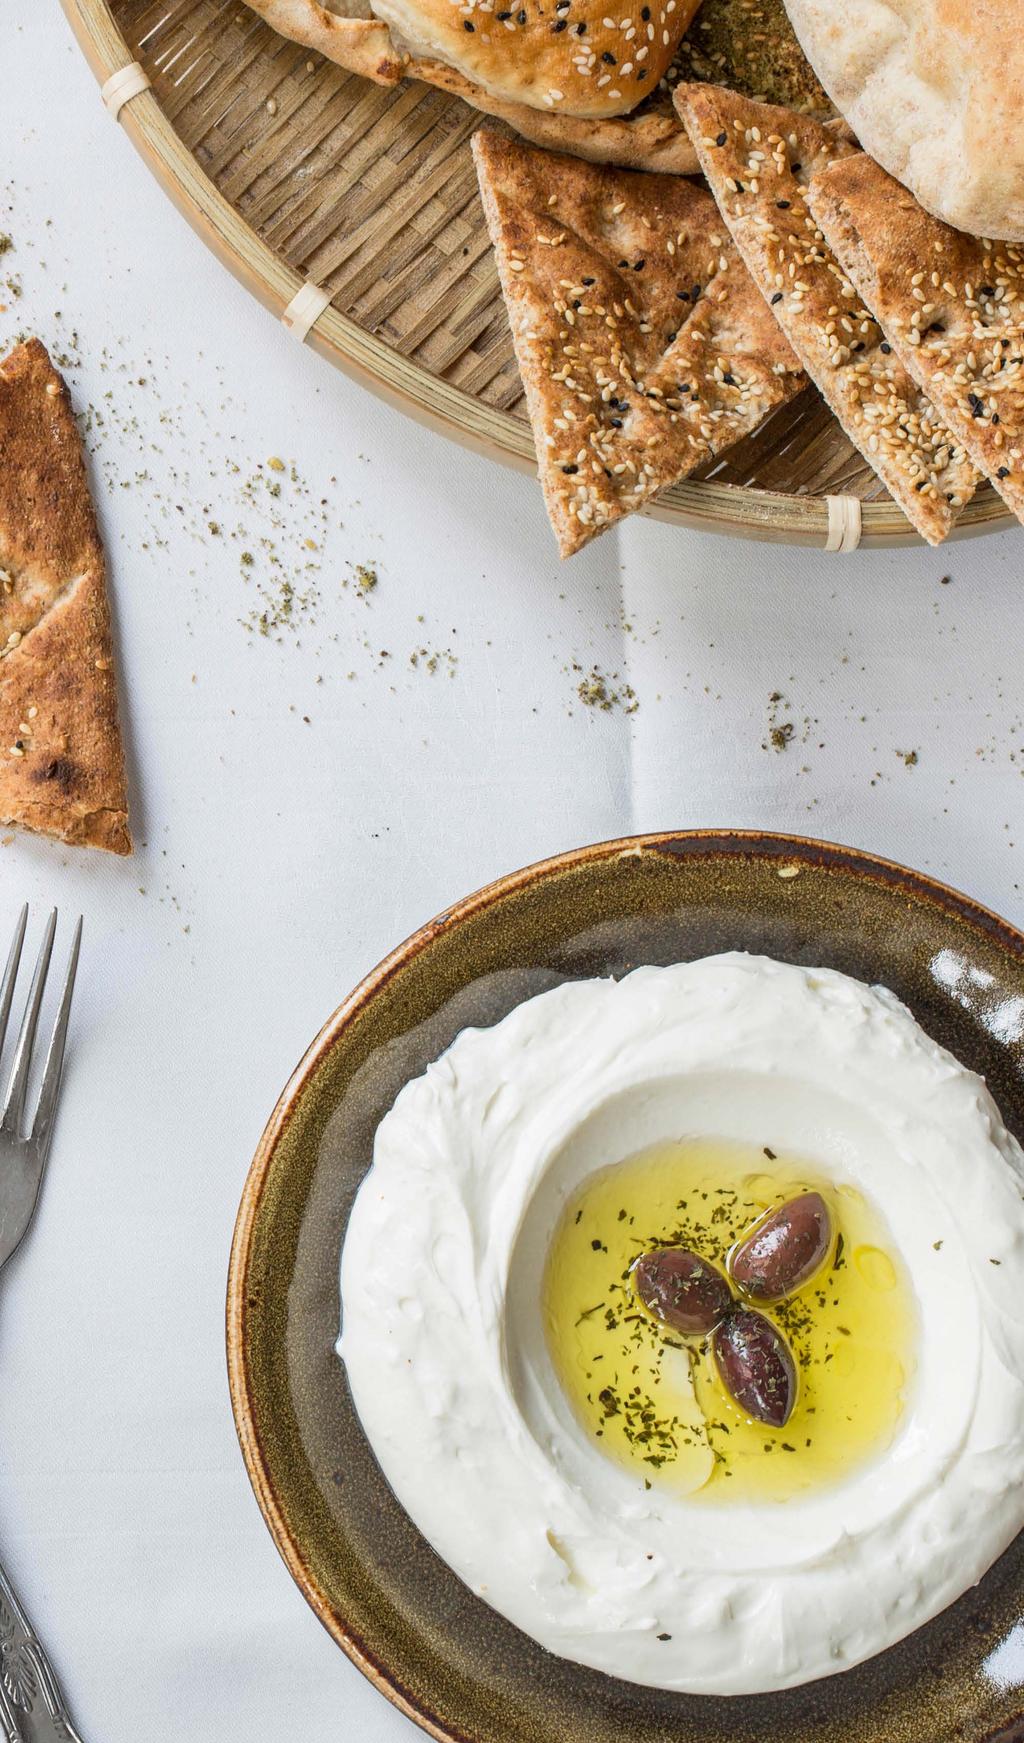 'There s a delicious range of starters, from hummus with pine